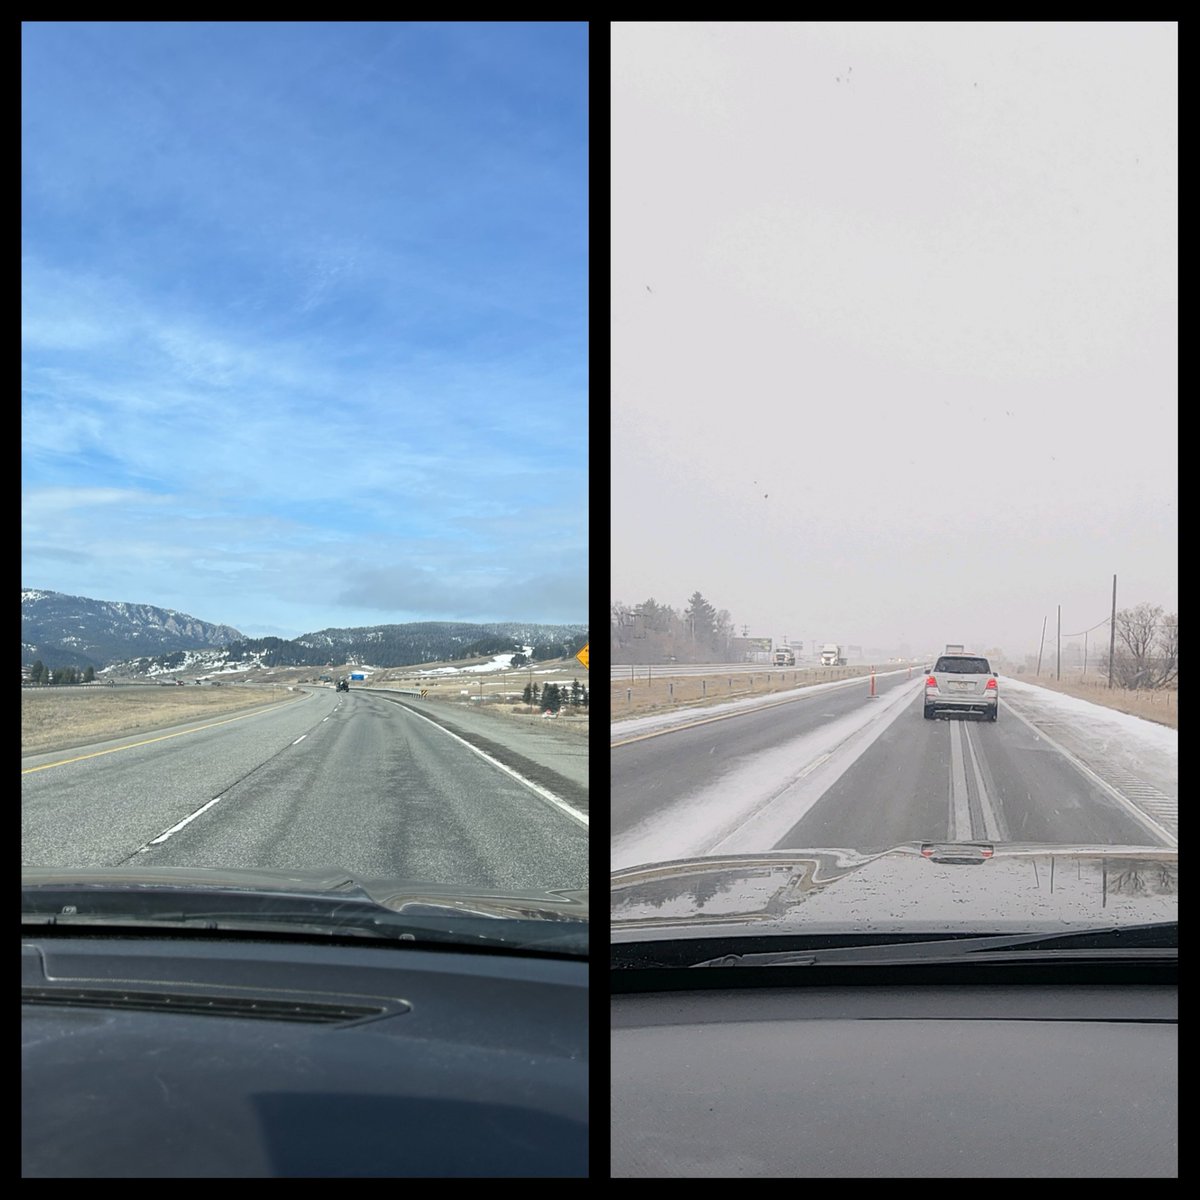 Montana weather is crazy. I was meeting up with someone today and we only live two hours apart. On the left was her weather. On the right was mine, same times. When I ended up sideways after hitting black ice on a bridge, I decided maybe we should turn around and not die lmao